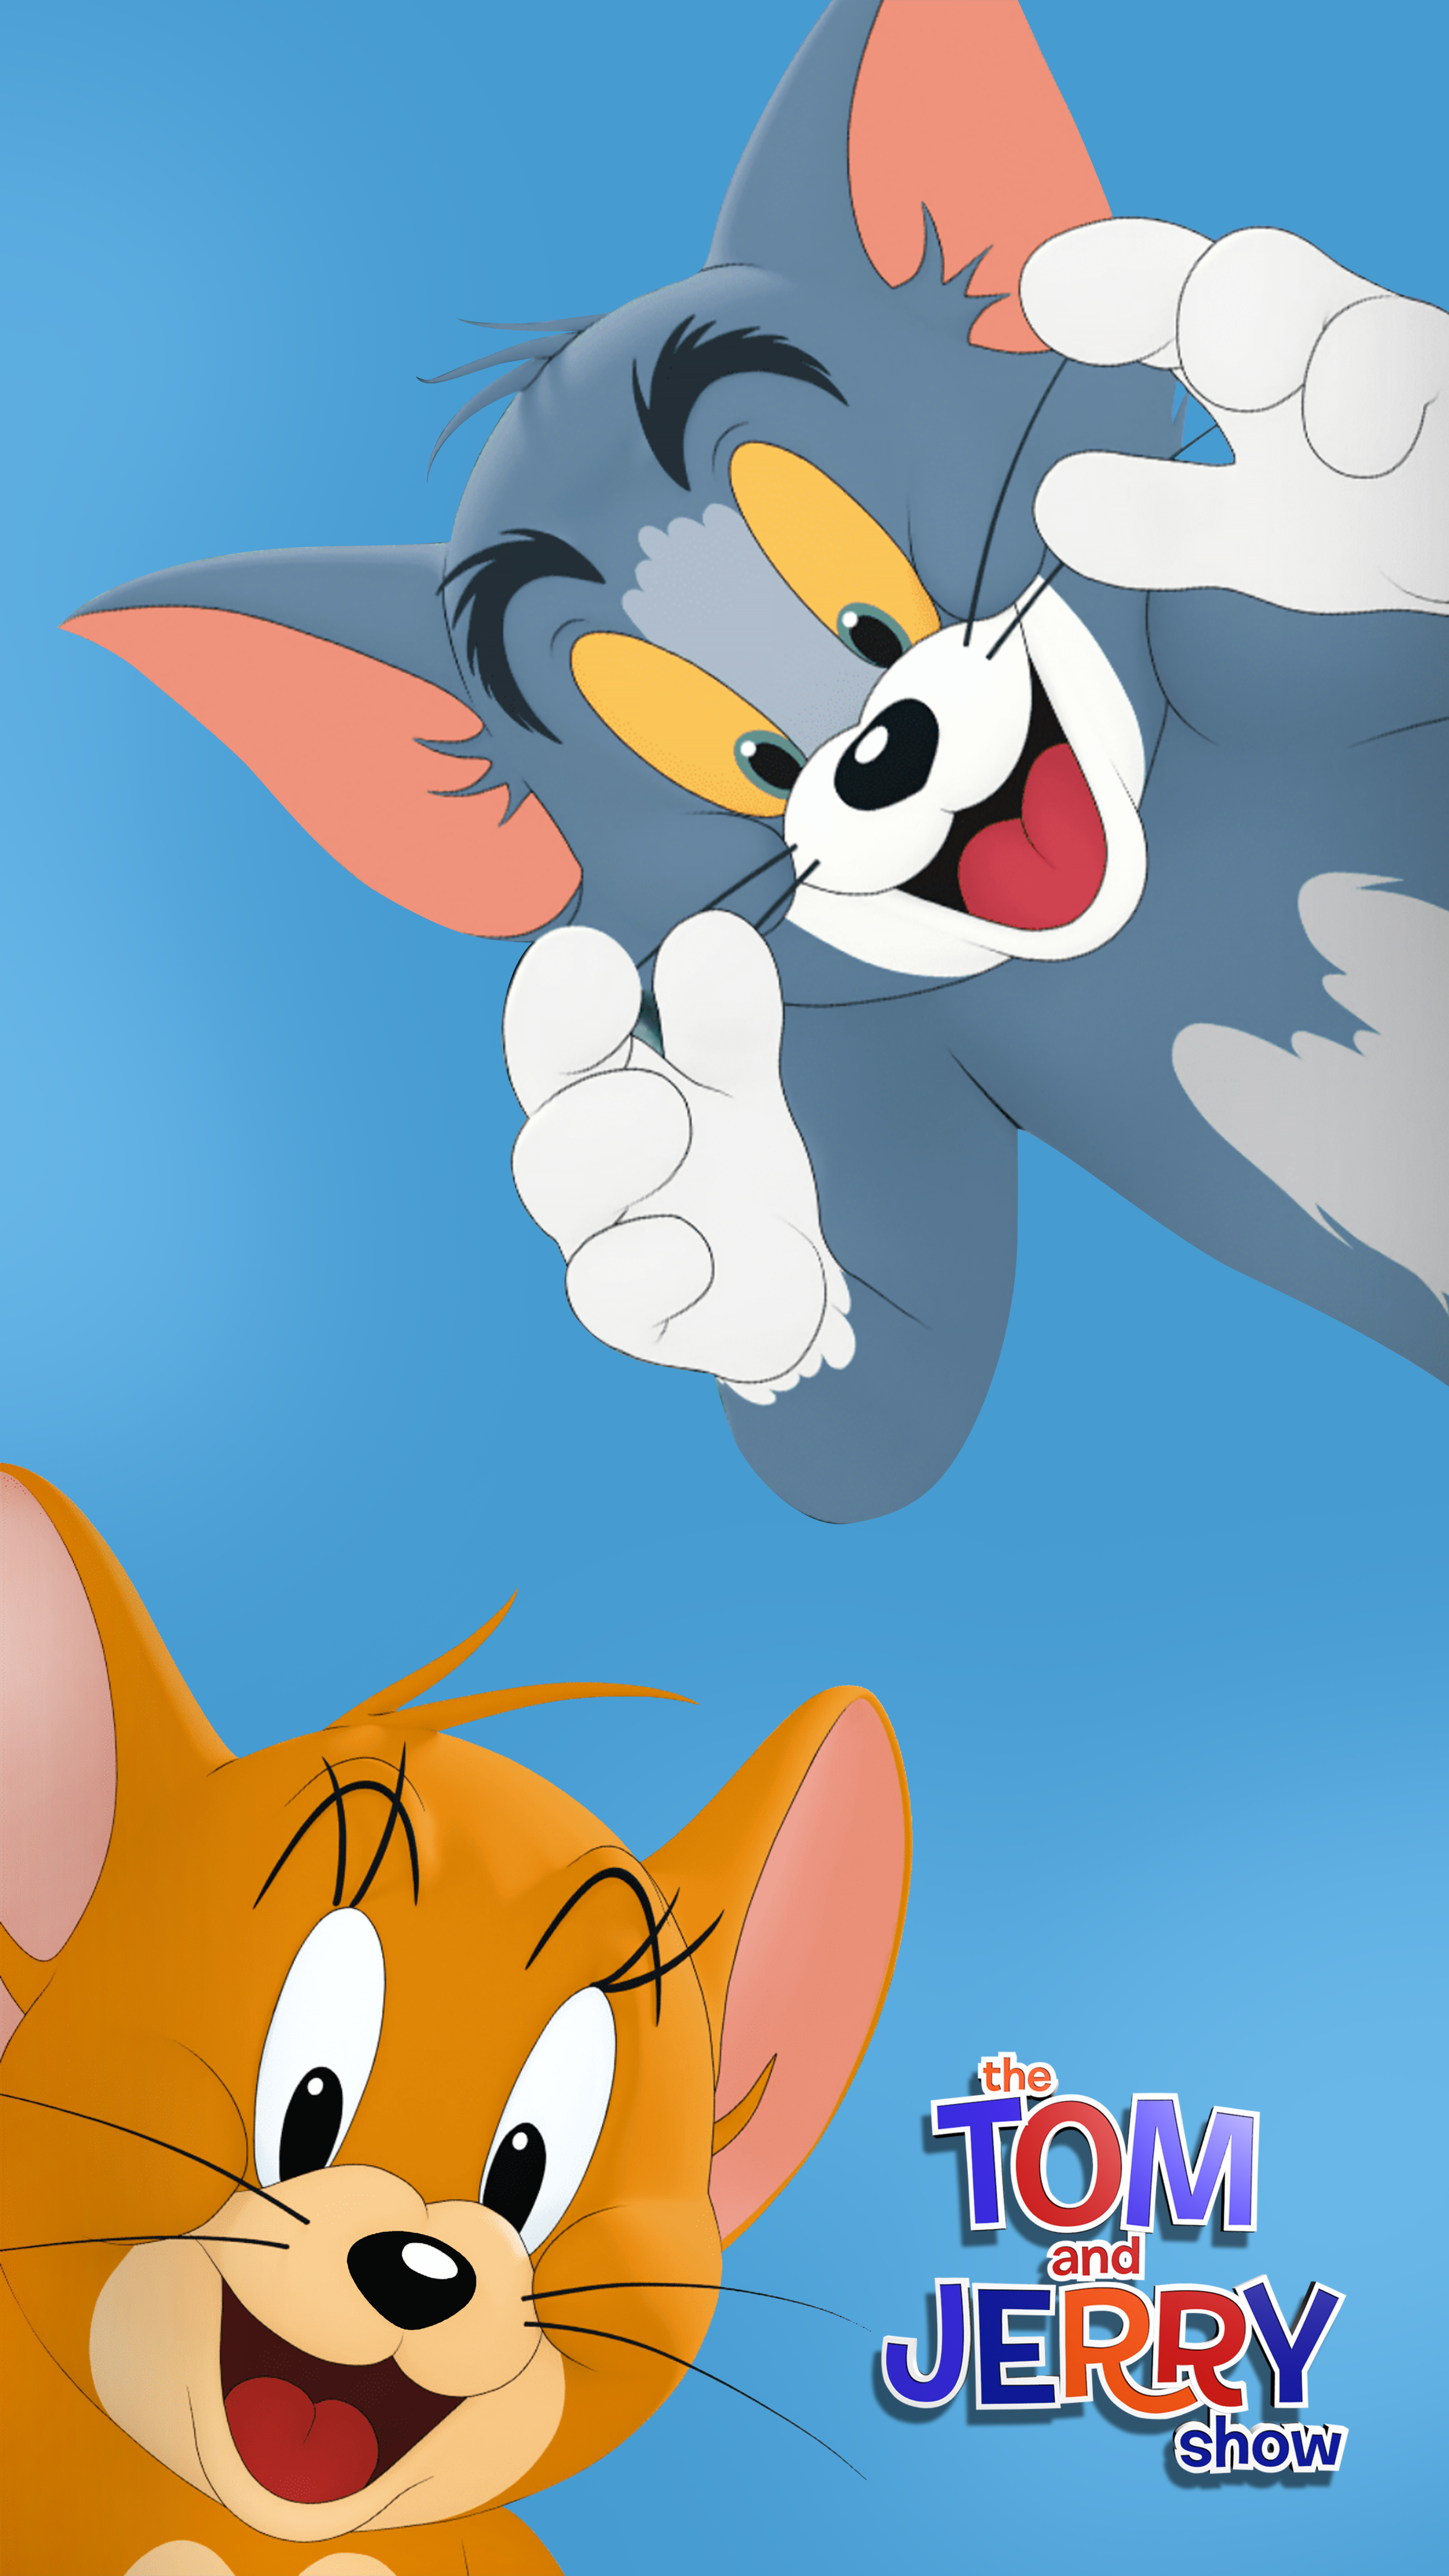 The Tom and Jerry Show. Games, Videos and Downloads